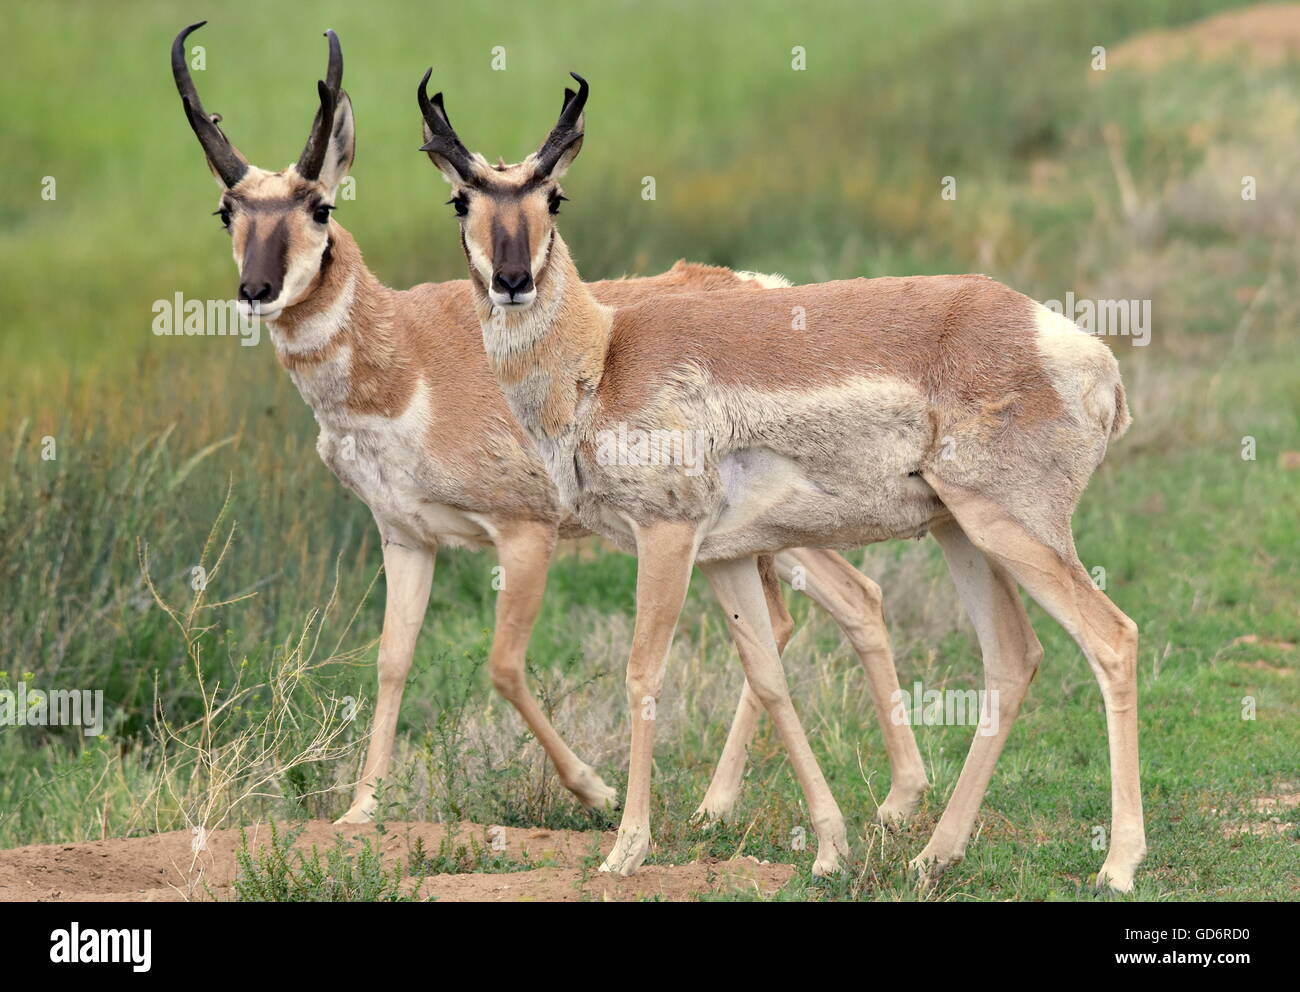 Pronghorns at Arapaho National Wildlife Refuge July 5, 2016 in Walden, Colorado. The deer-like Pronghorn is the sole surviving member of an ancient family dating back 20 million years and the only animal in the world with branched horns and to shed its horns, as if they were antlers. The Pronghorn is the fastest animal in the western hemisphere, running in 20-foot bounds at up to 60 miles per hour. Stock Photo